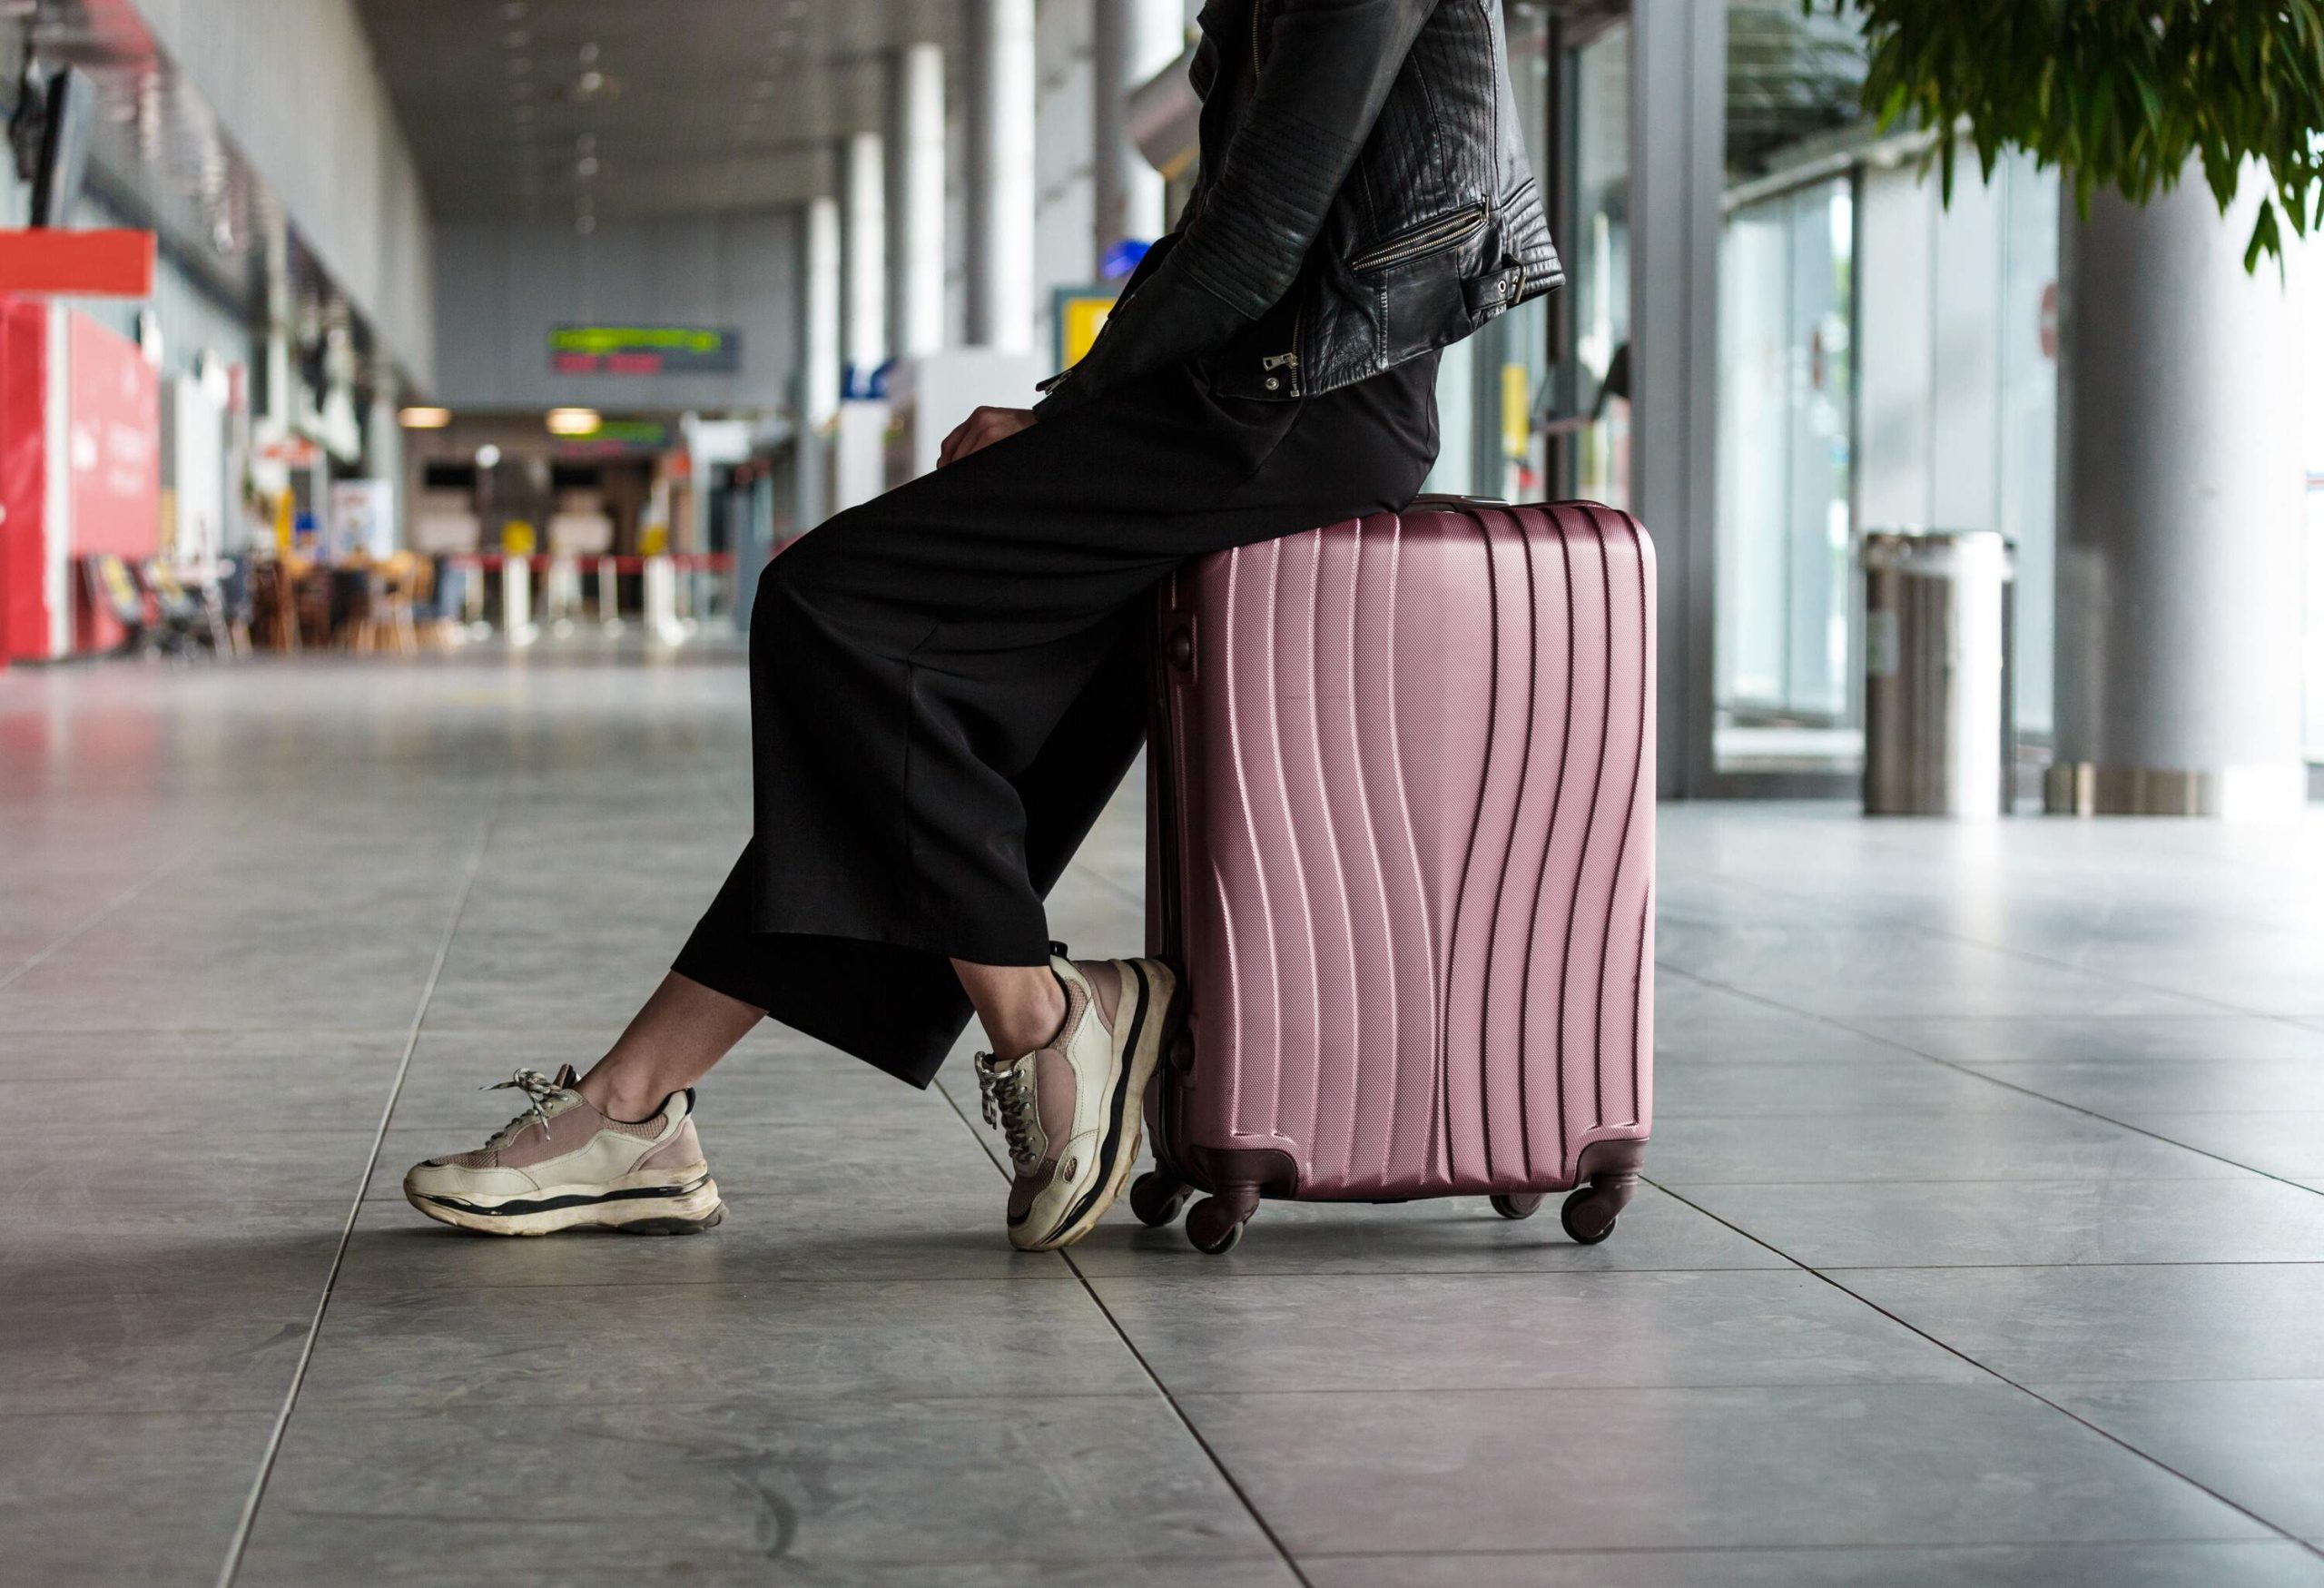 A woman in a black skirt sits on a silver-coloured luggage in an airport lobby.